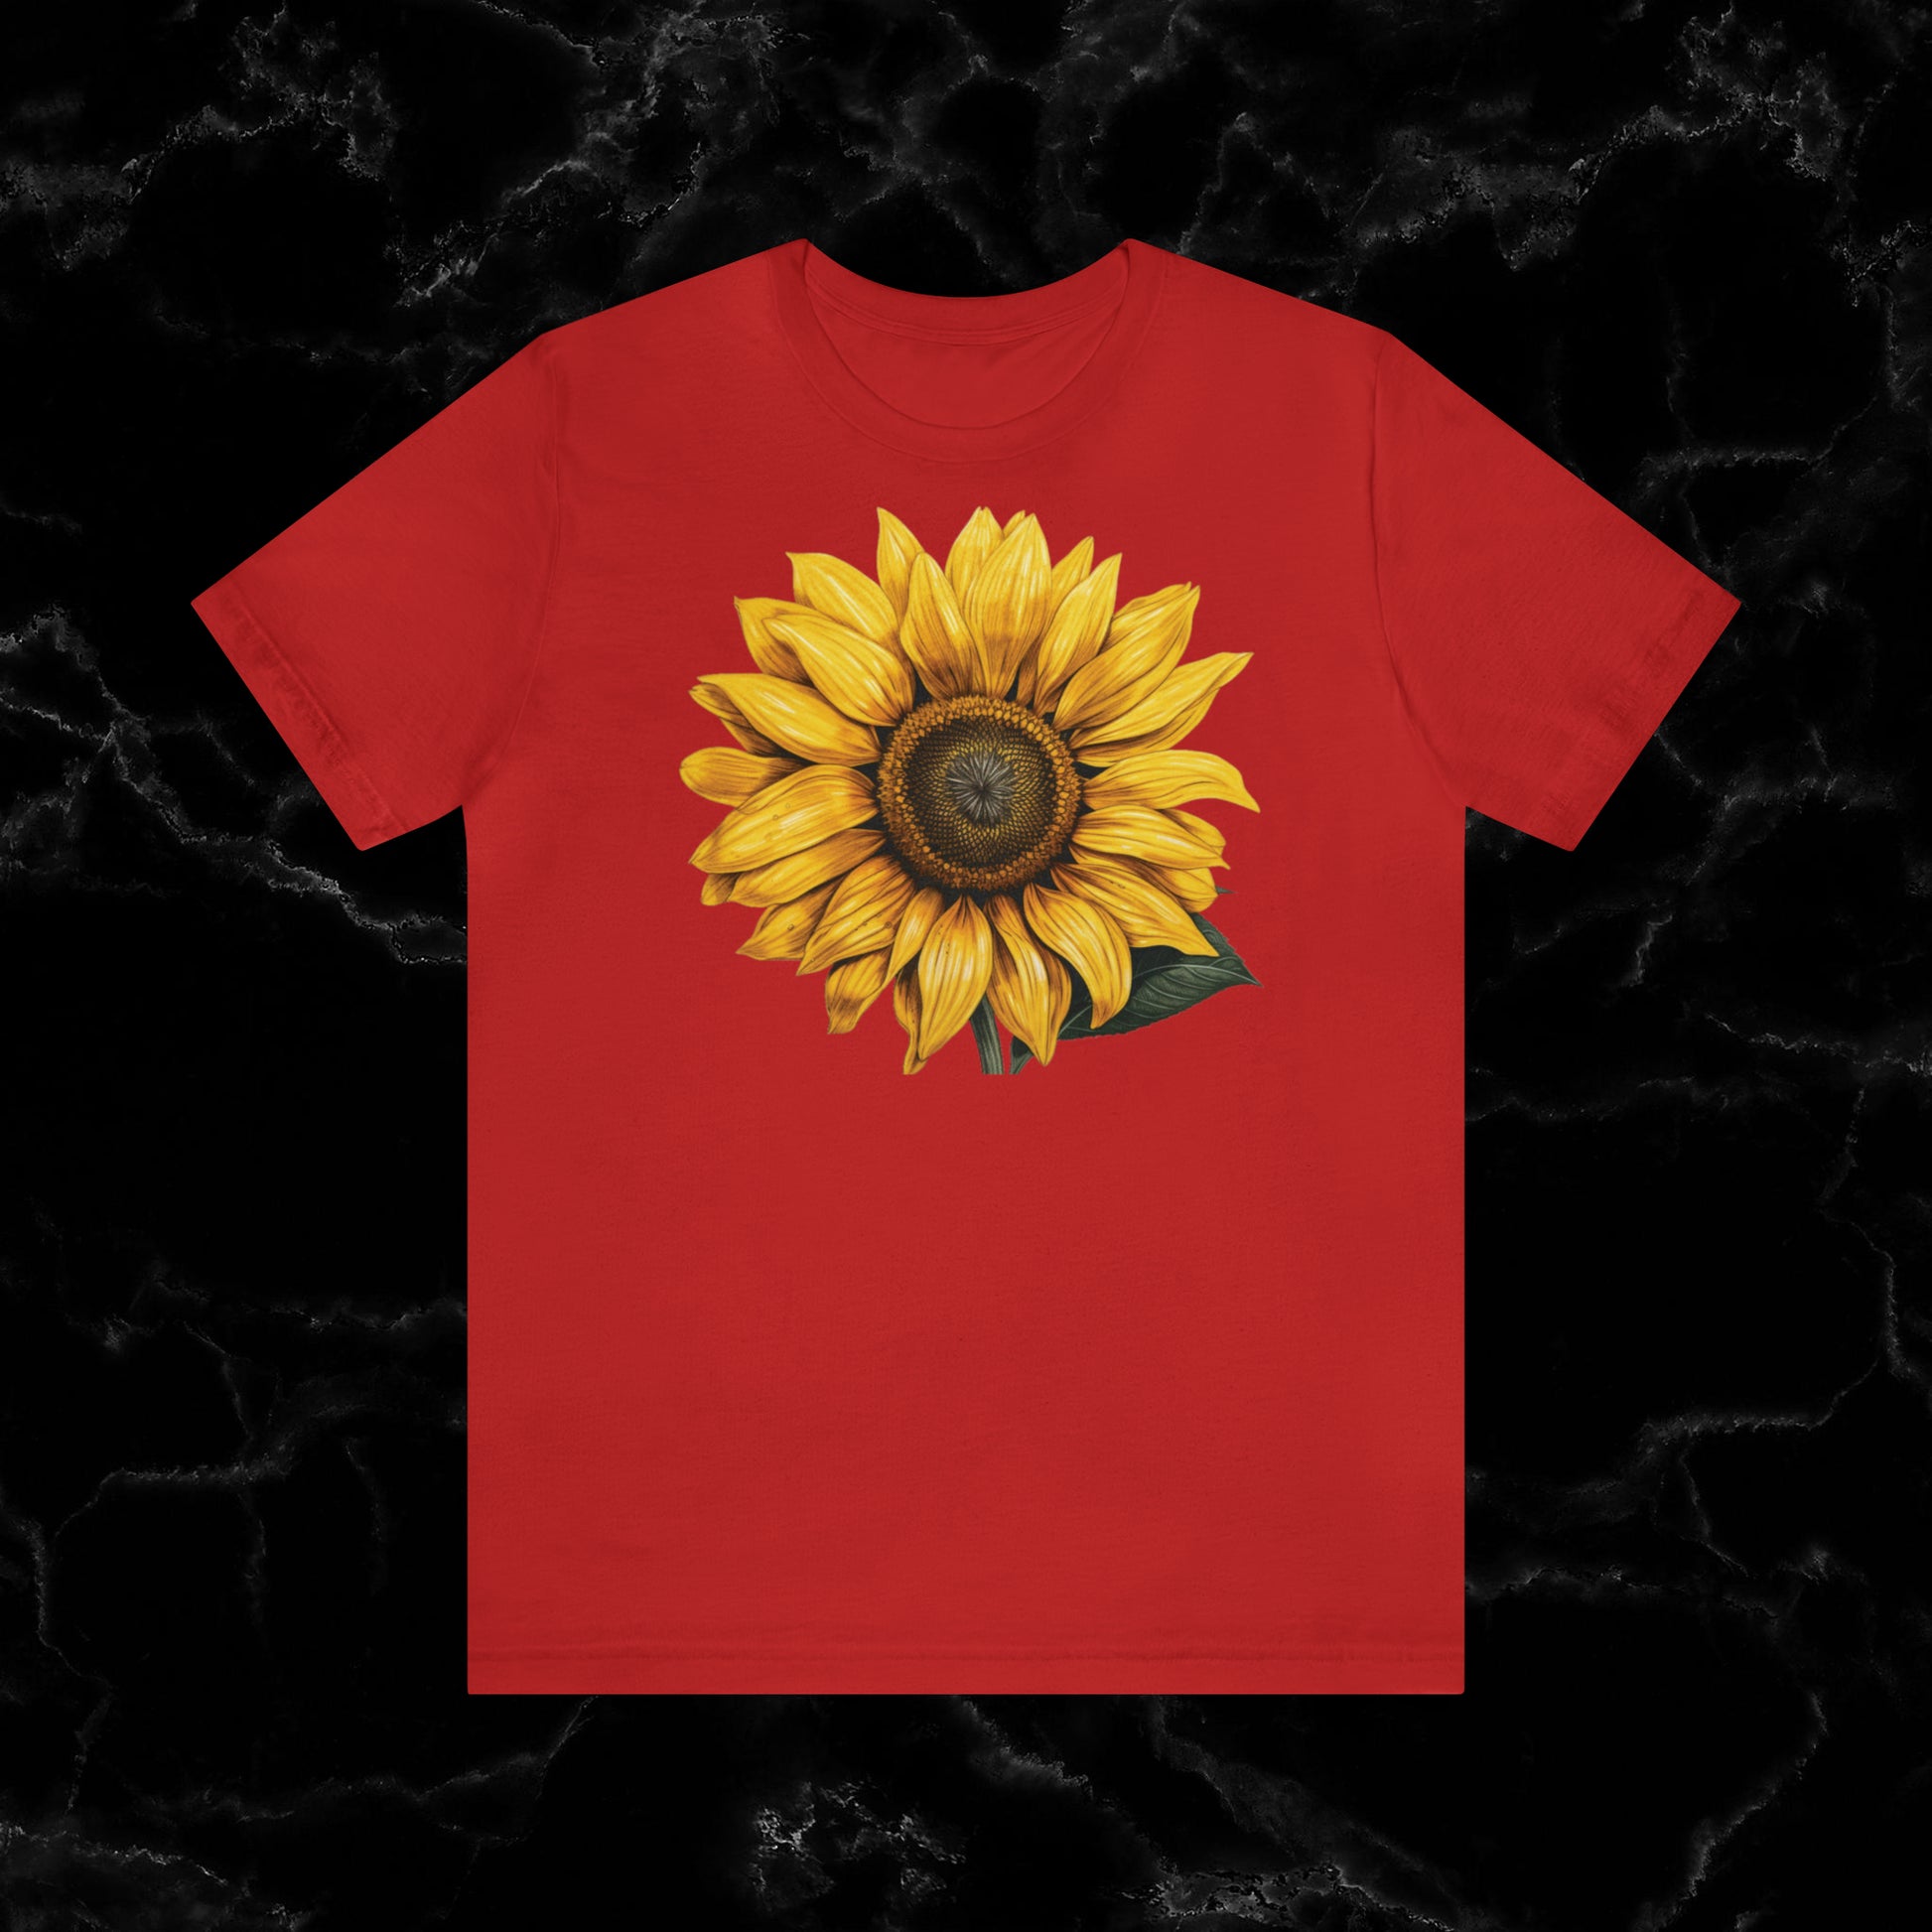 Sunflower Shirt Collection - Floral Tee, Garden Shirt, and Women's Fall Fashion Staples T-Shirt Red S 